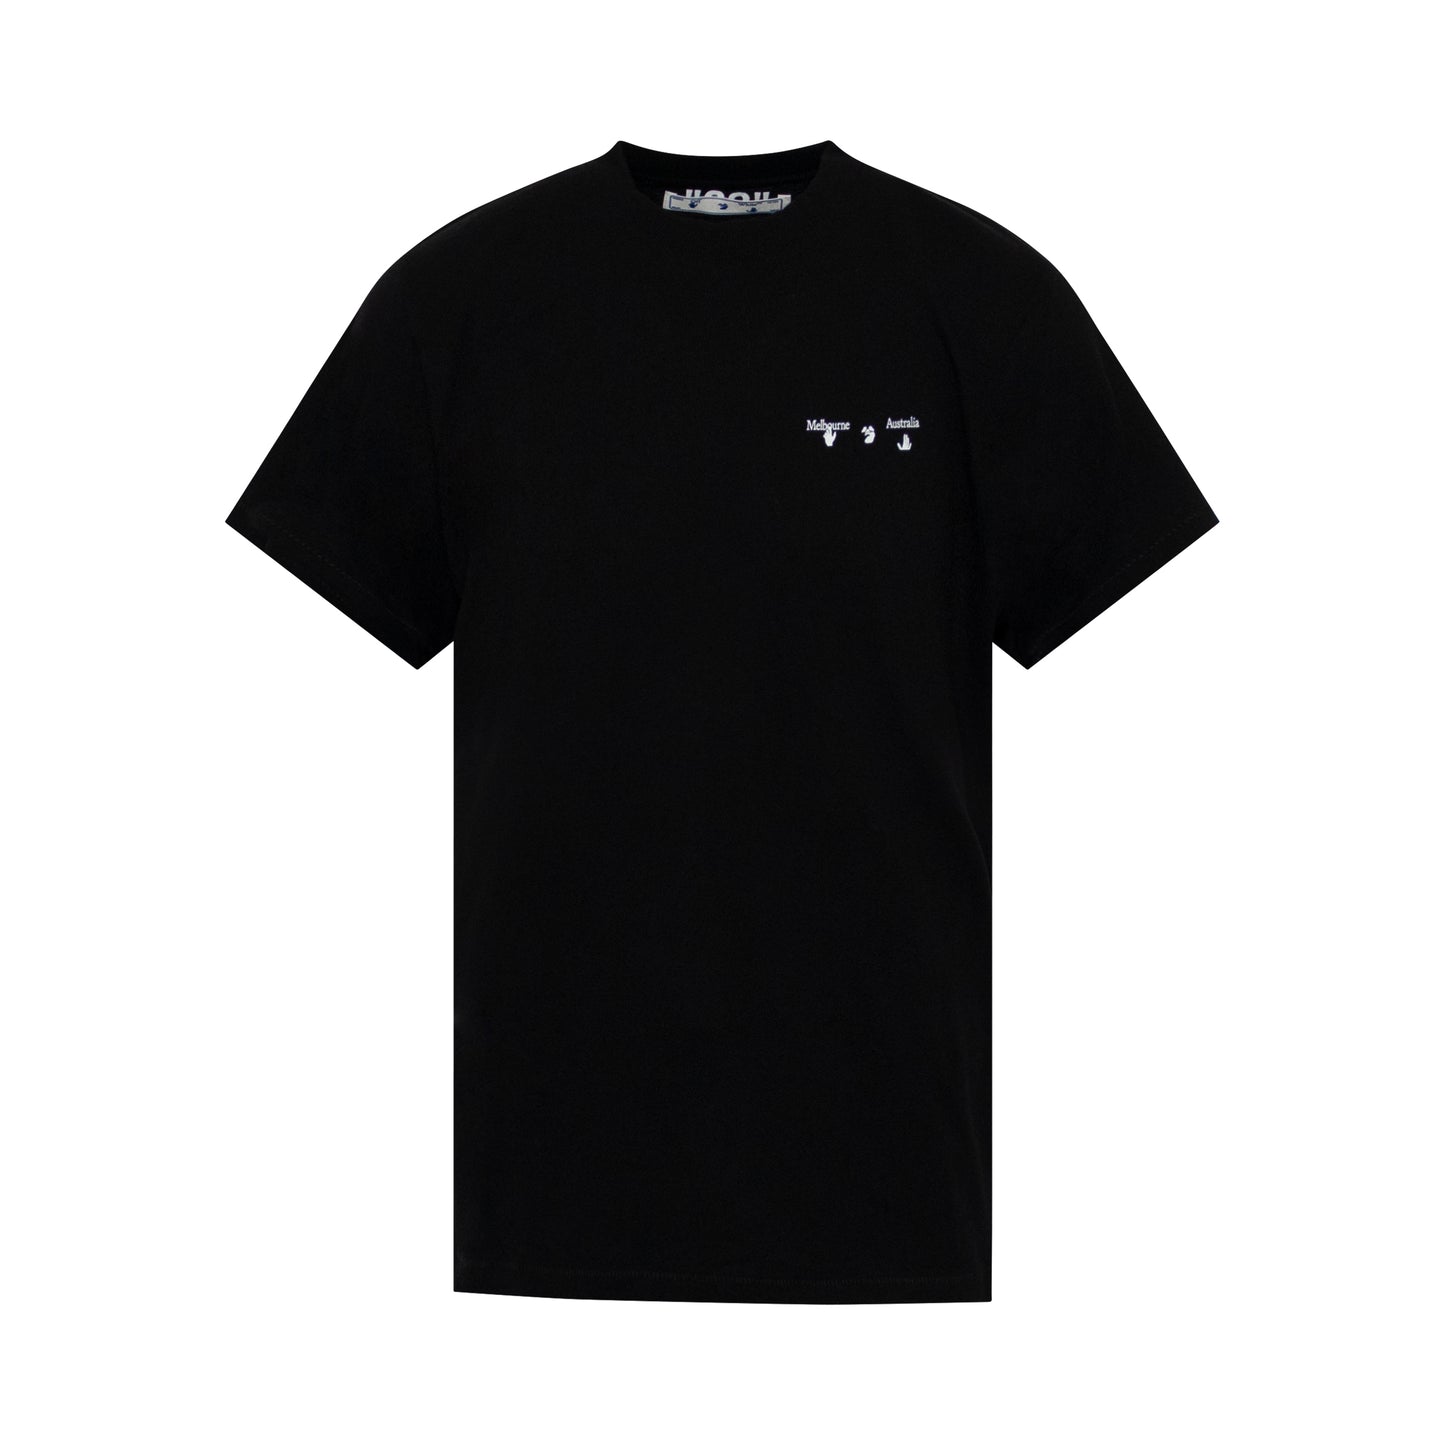 Off-White Melbourne T-Shirt in Black